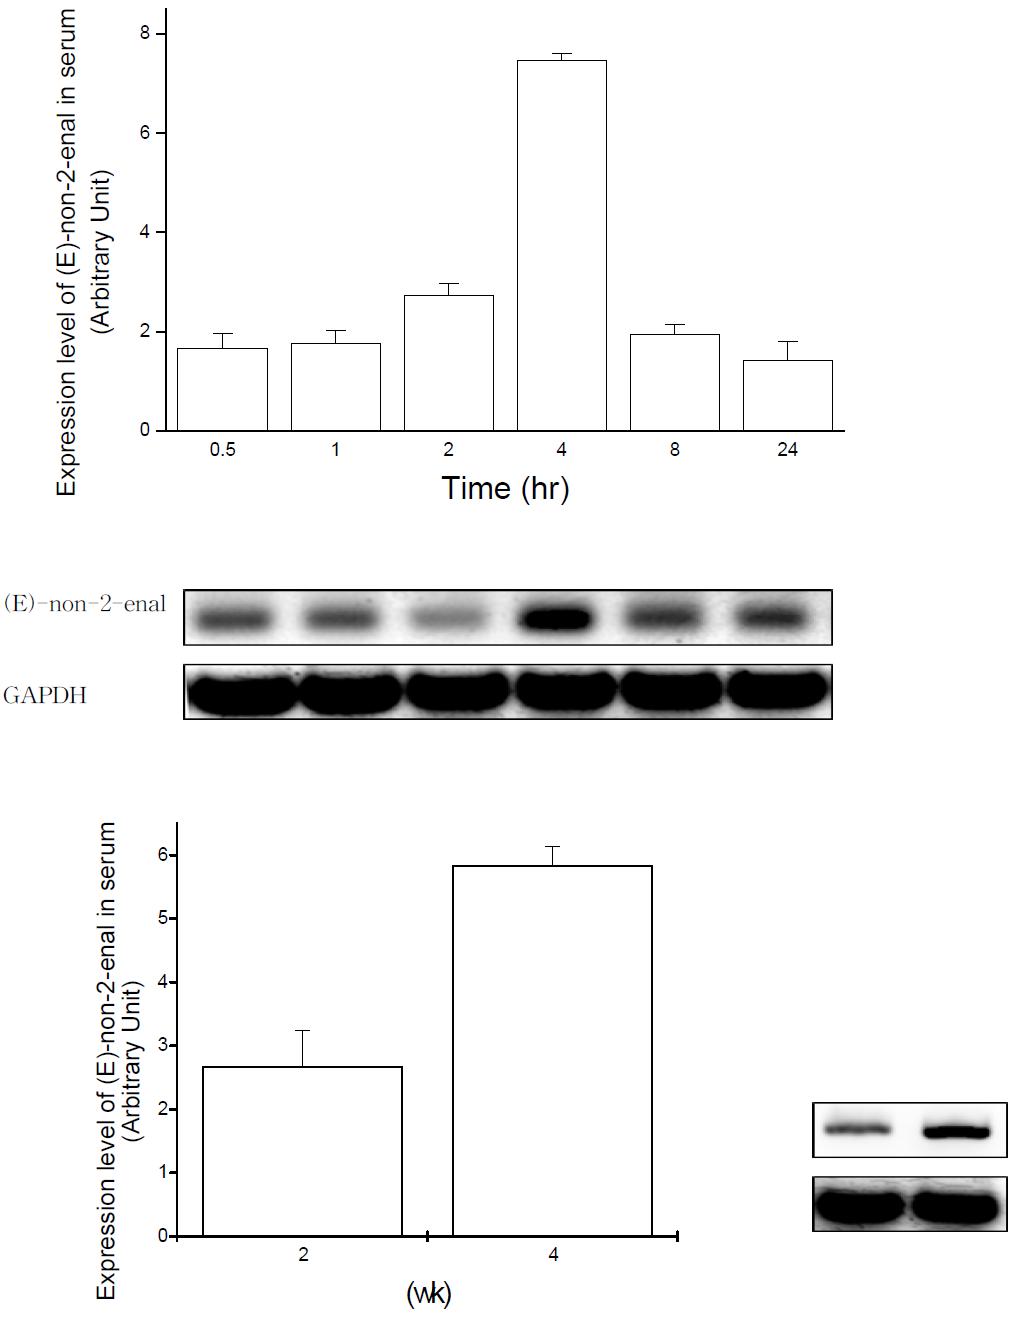 Expression level of (E)-non-2-enal in rat serum after oral administration of HNE.